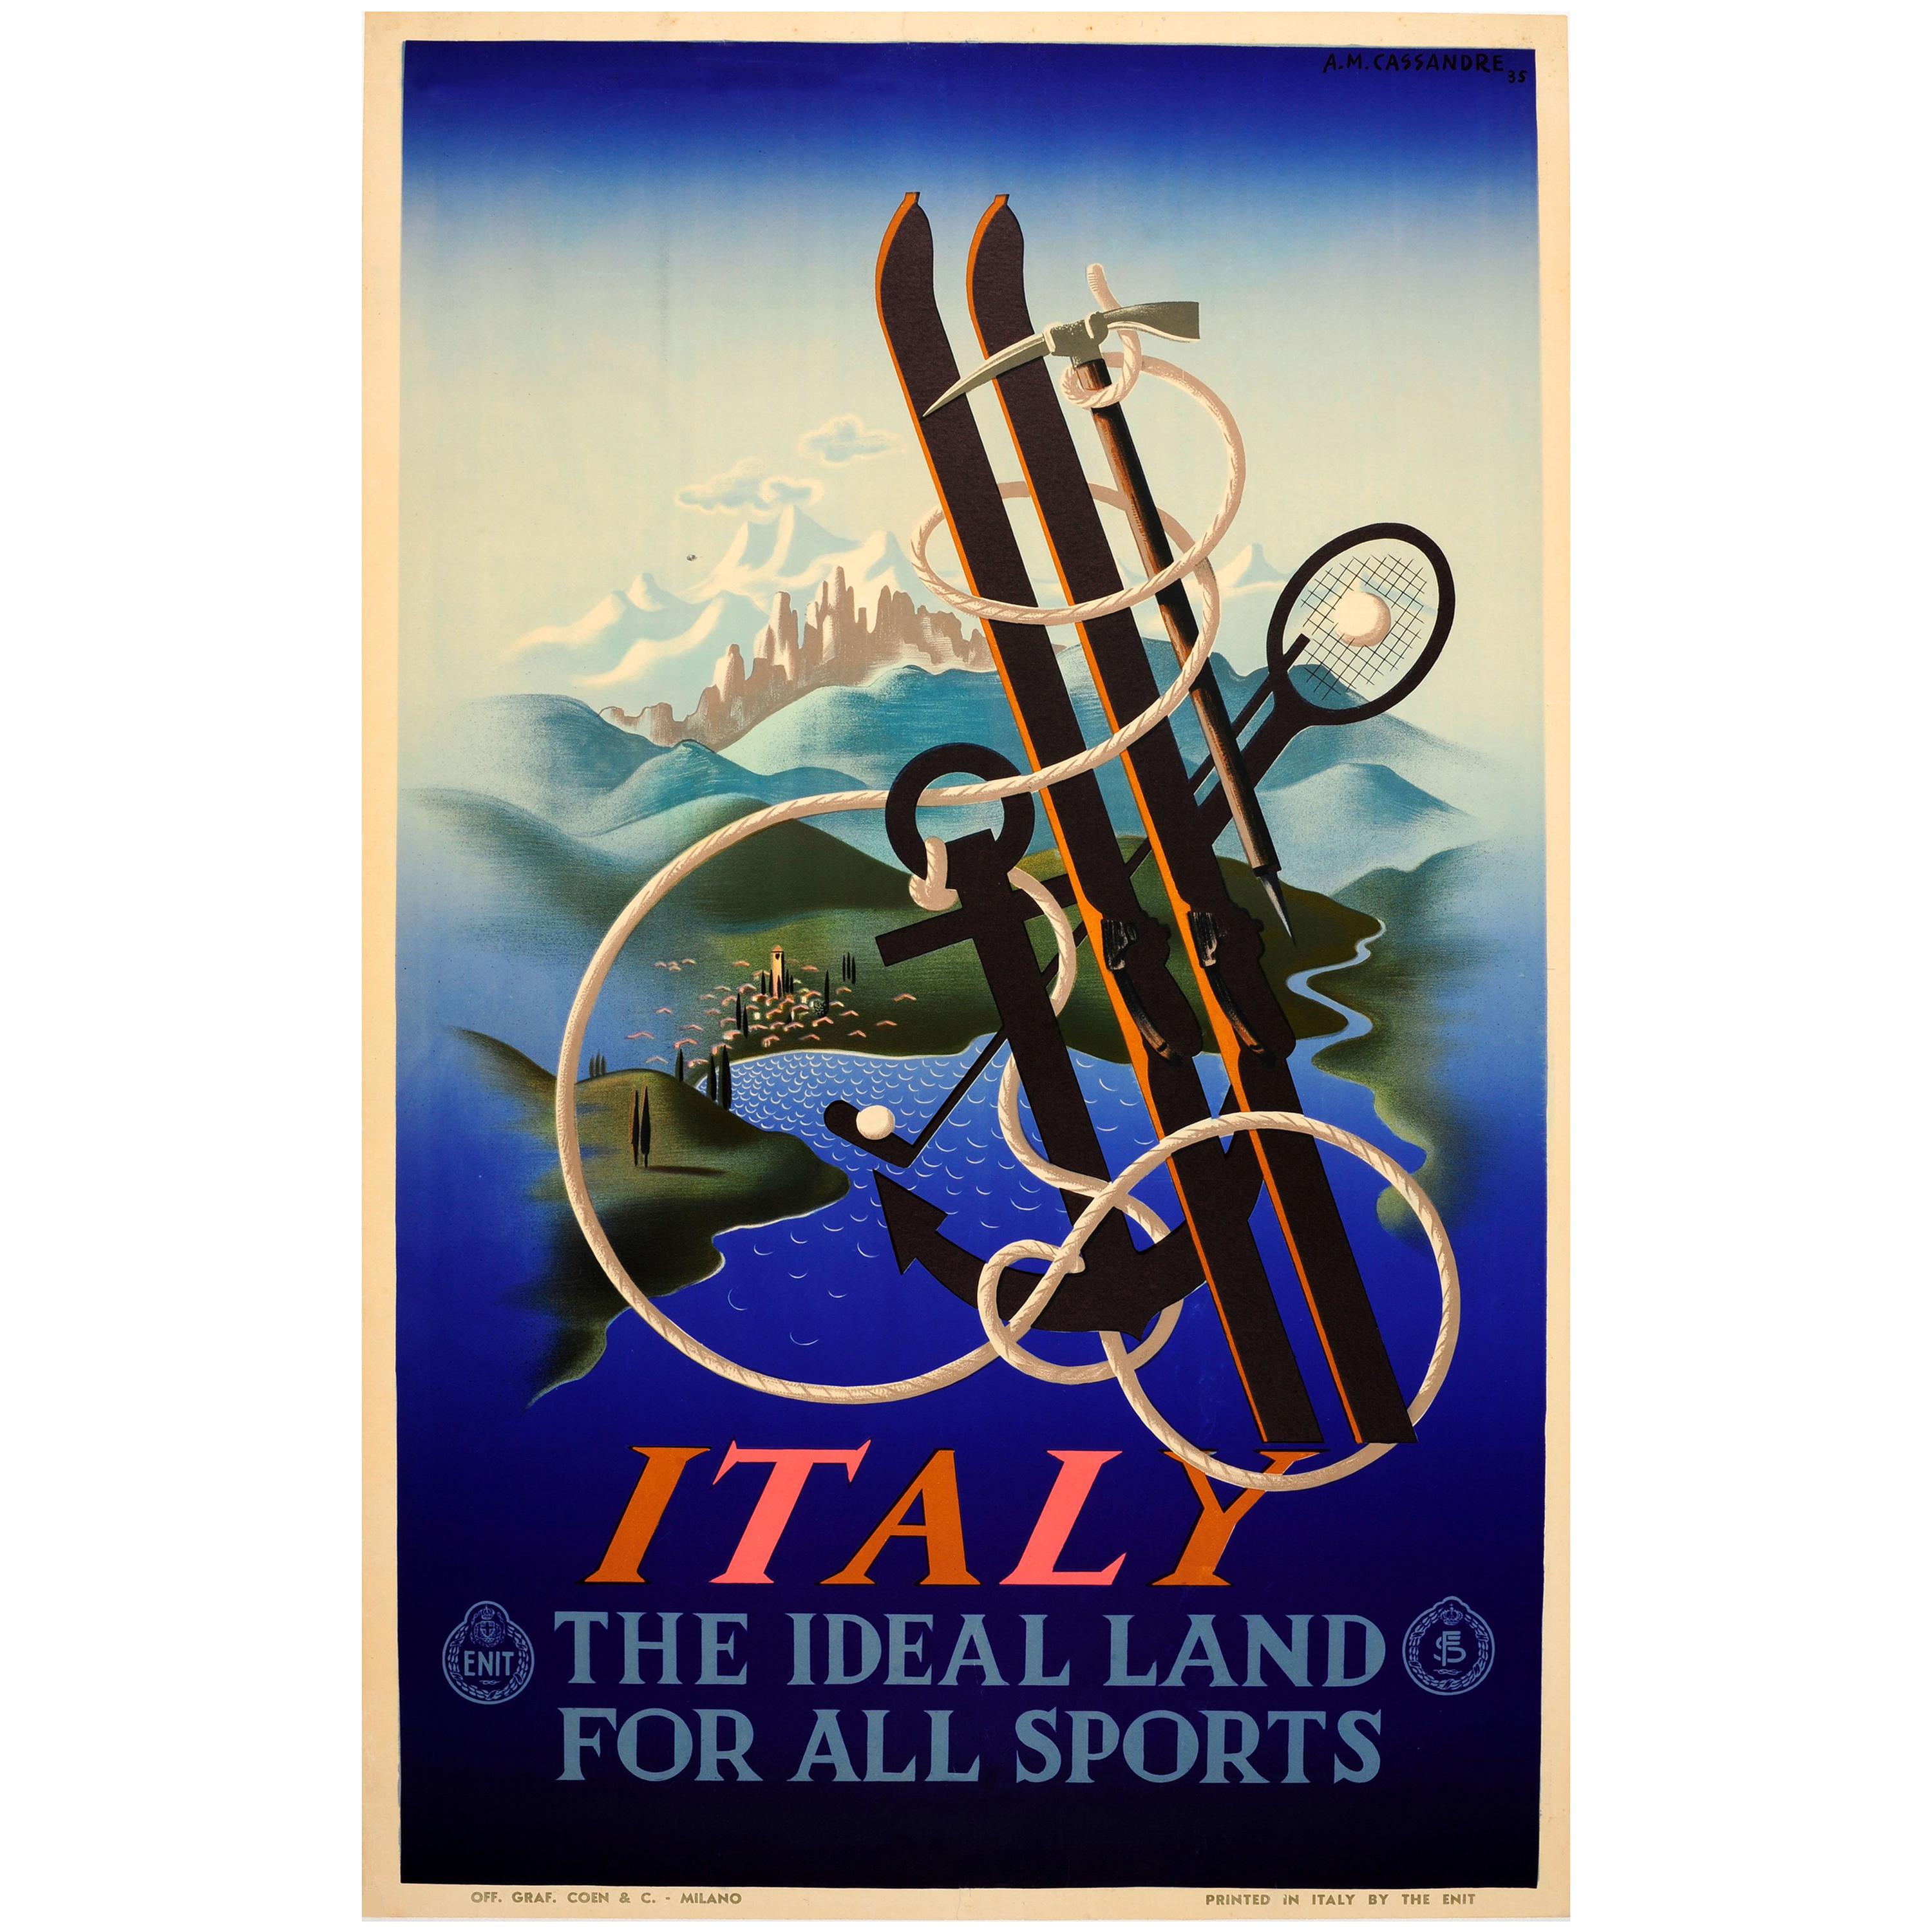 Original Vintage ENIT Travel Poster By Cassandre Italy Ideal Land For All Sports